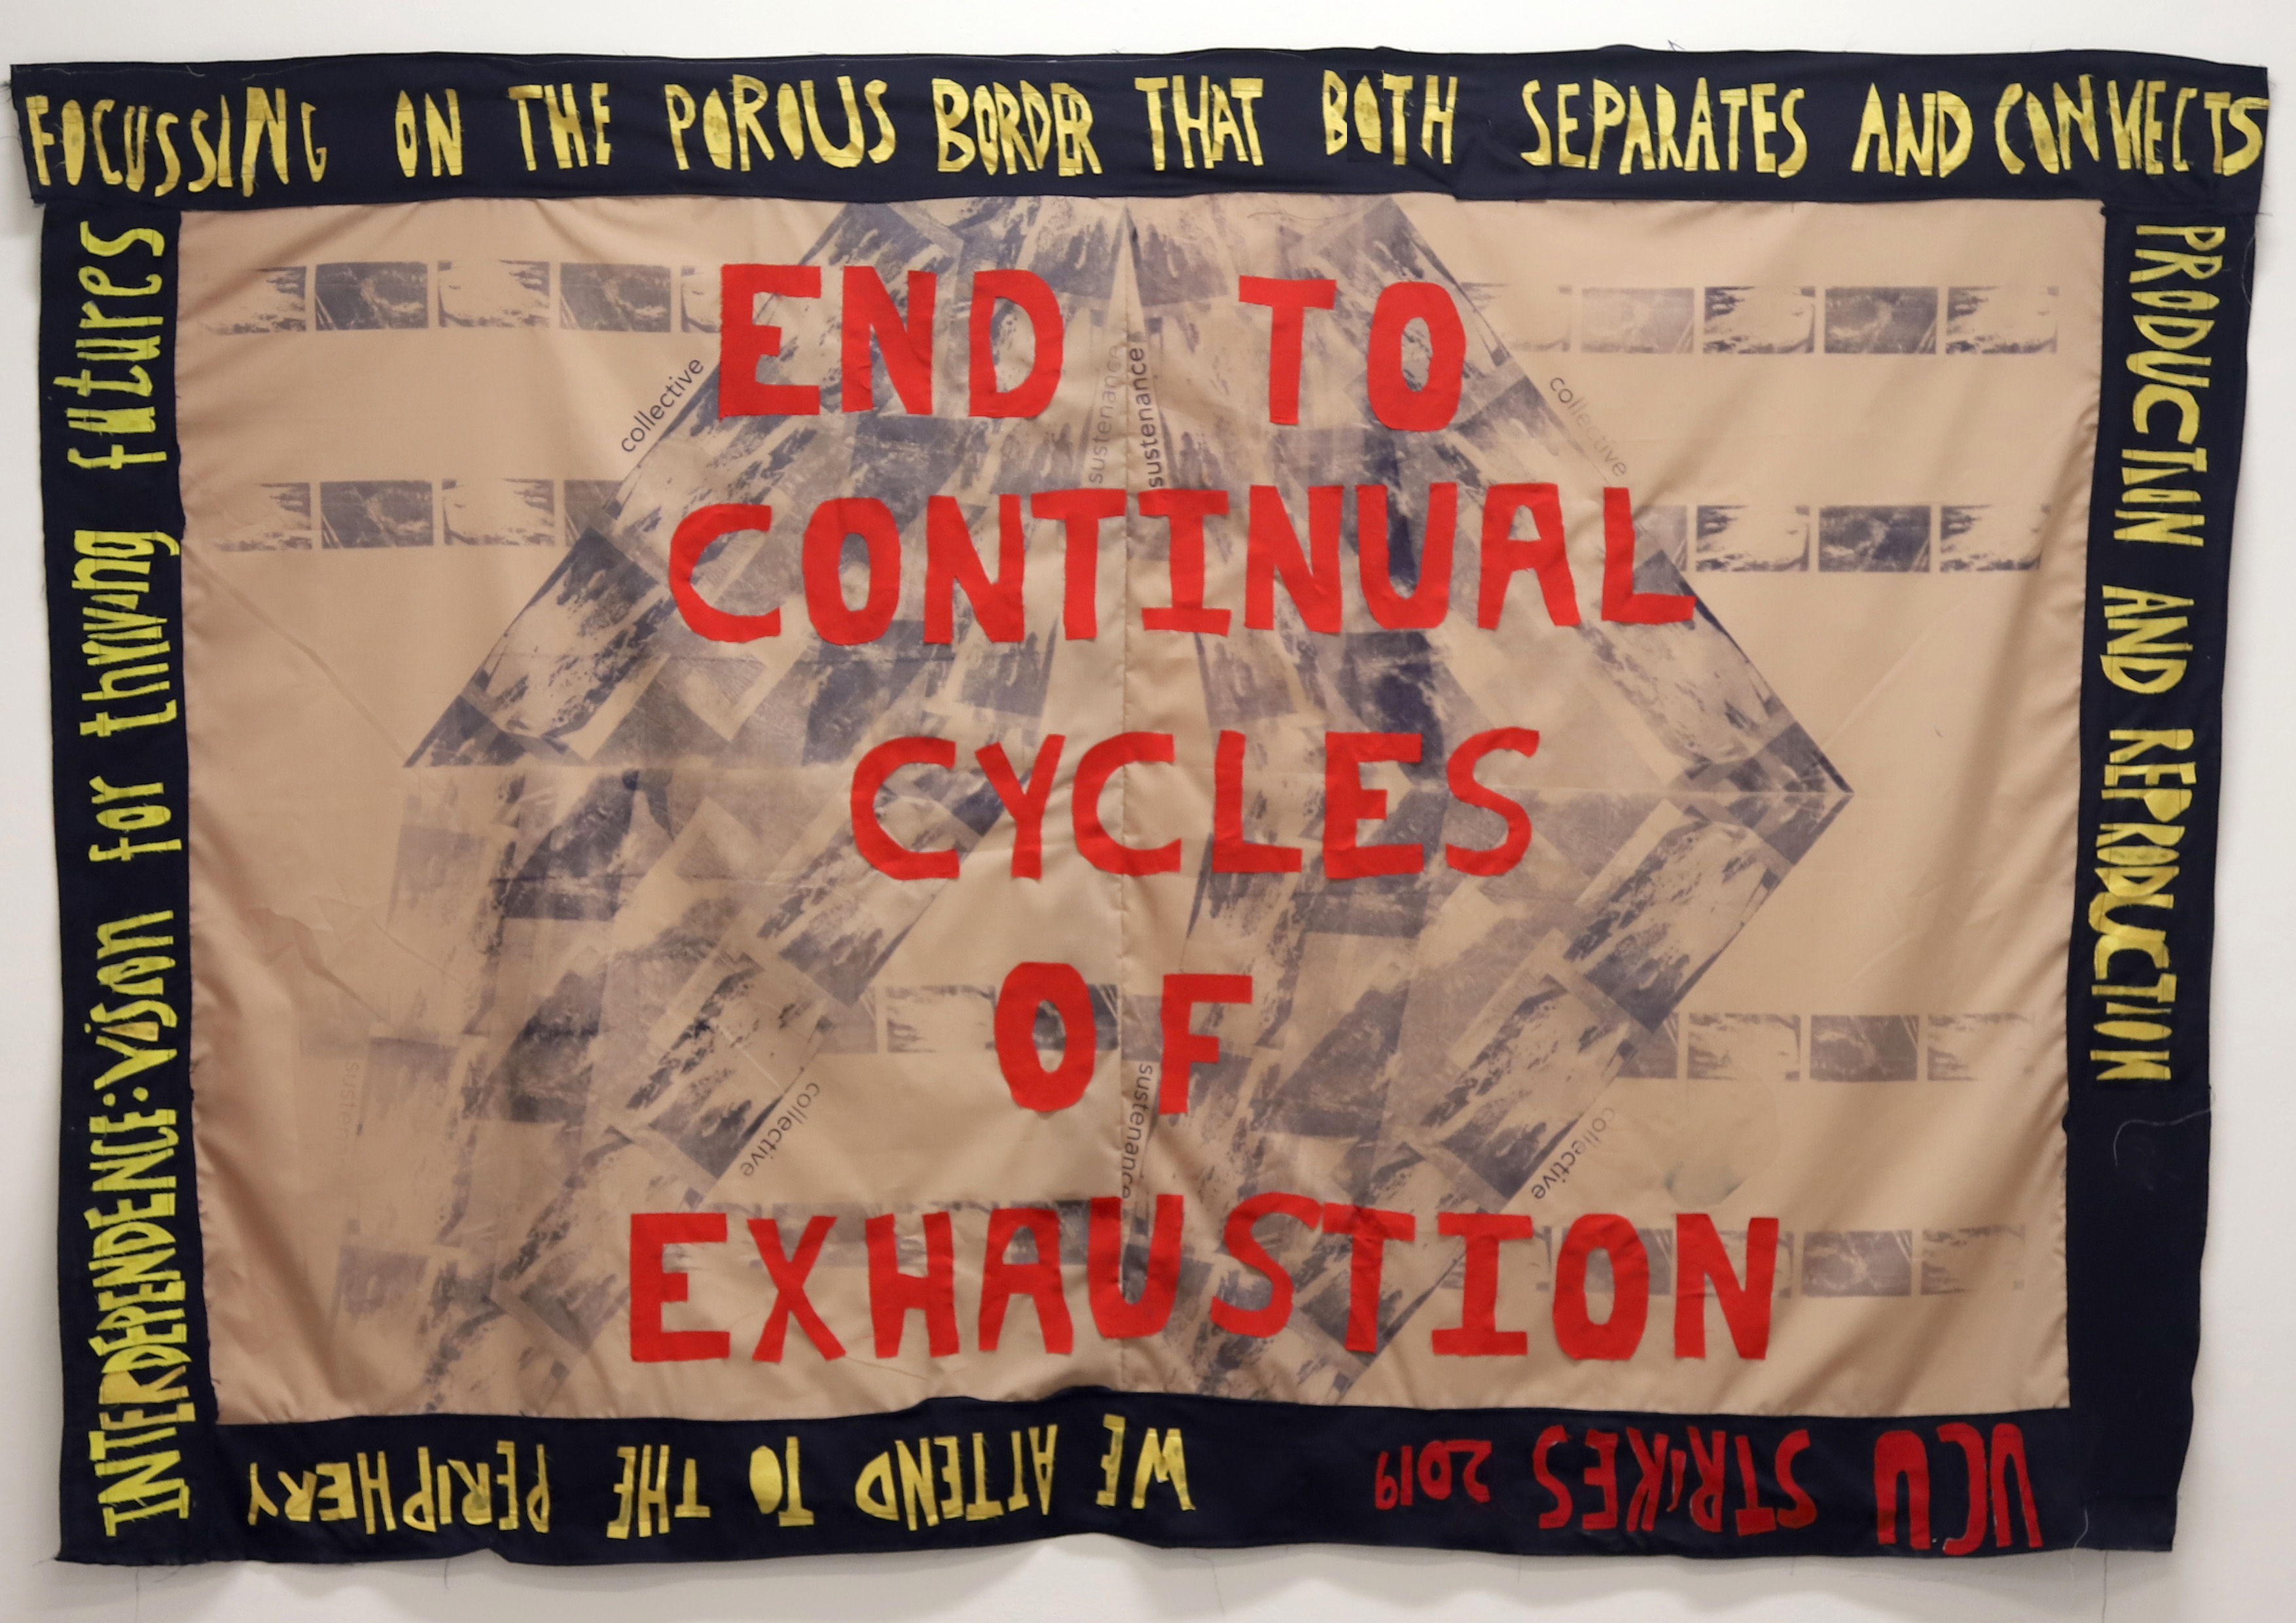 Ishwari Bhalerao and Leonie Rousham, End to Continual Cycles of Exhaustion